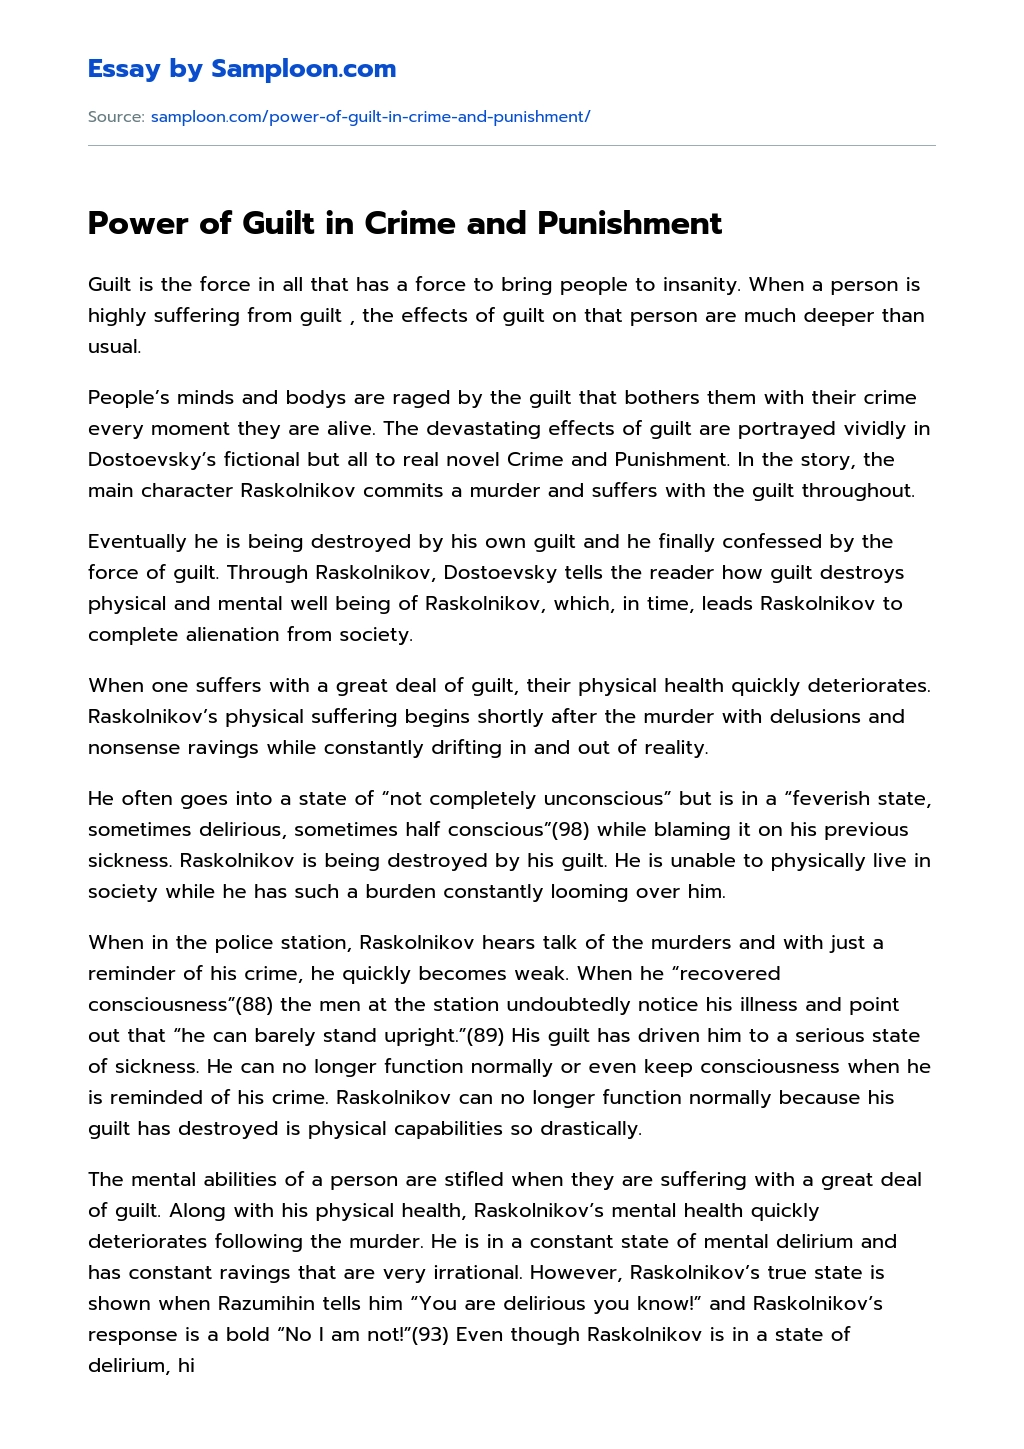 Power of Guilt in Crime and Punishment essay